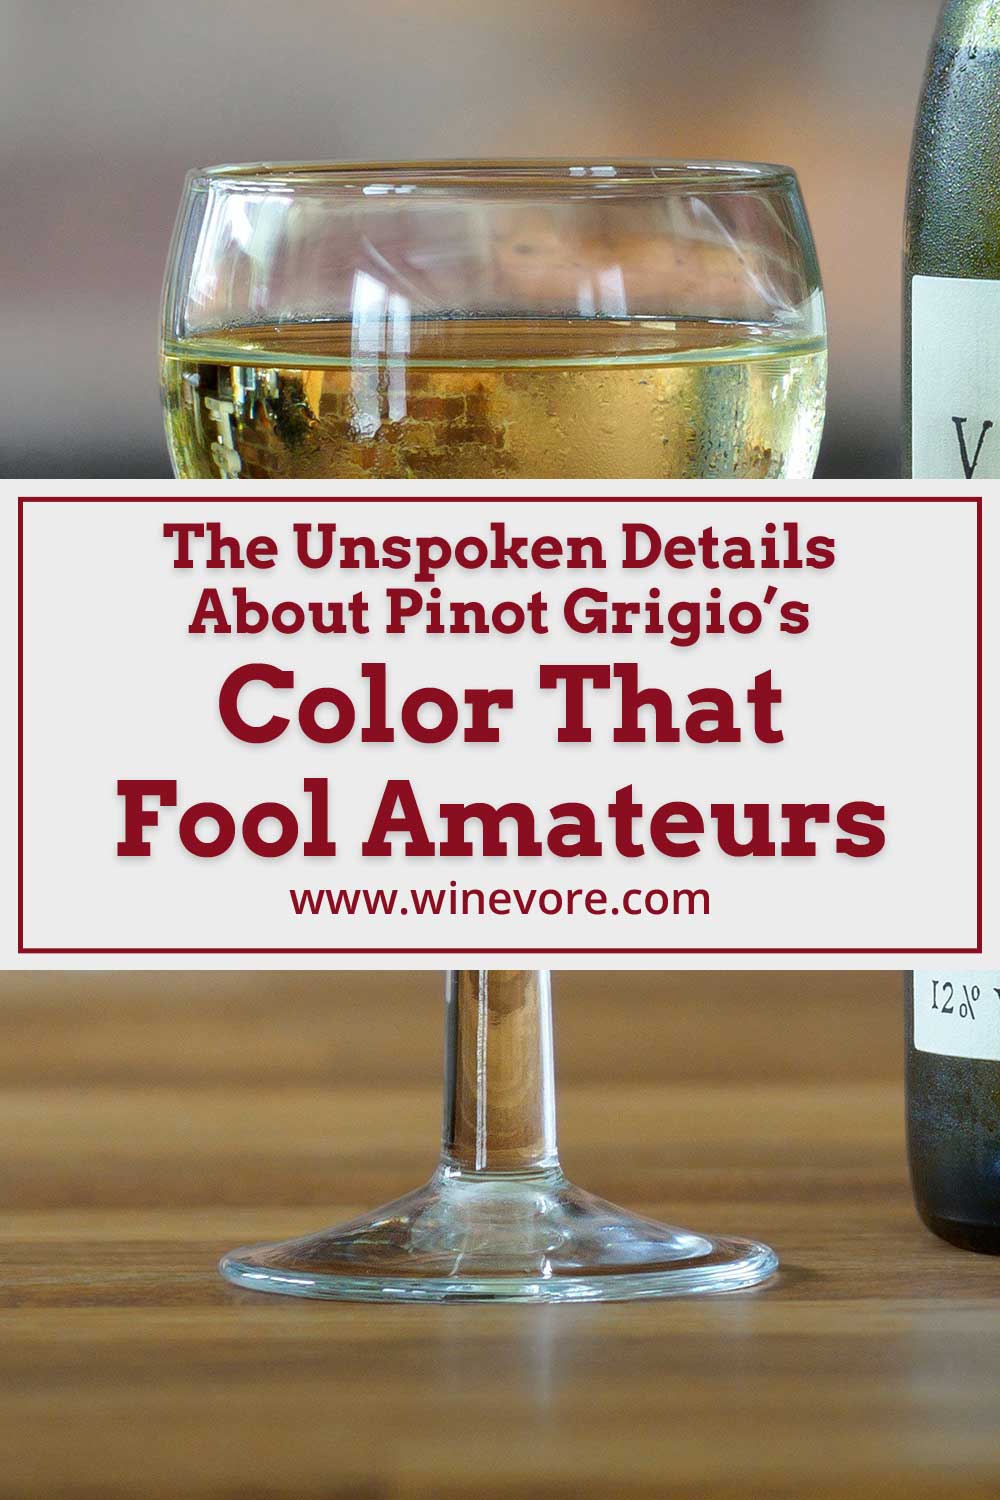 A wine glass on a wooden surface of a table - Details About Pinot Grigio’s Color